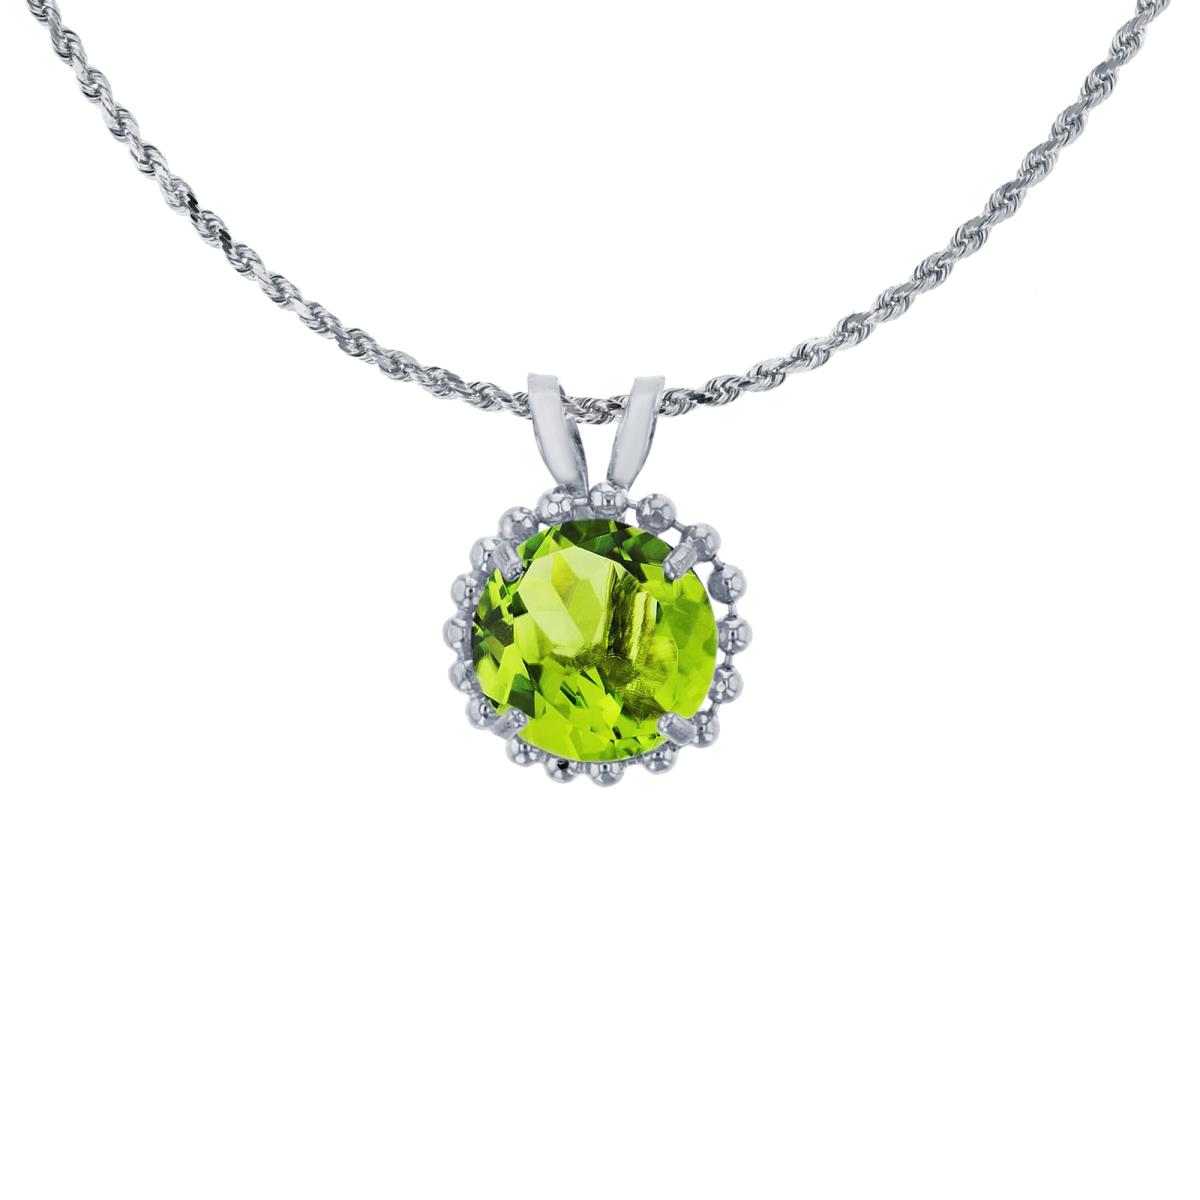 10K White Gold 6mm Rd Cut Peridot with Bead Frame Rabbit Ear 18" Necklace